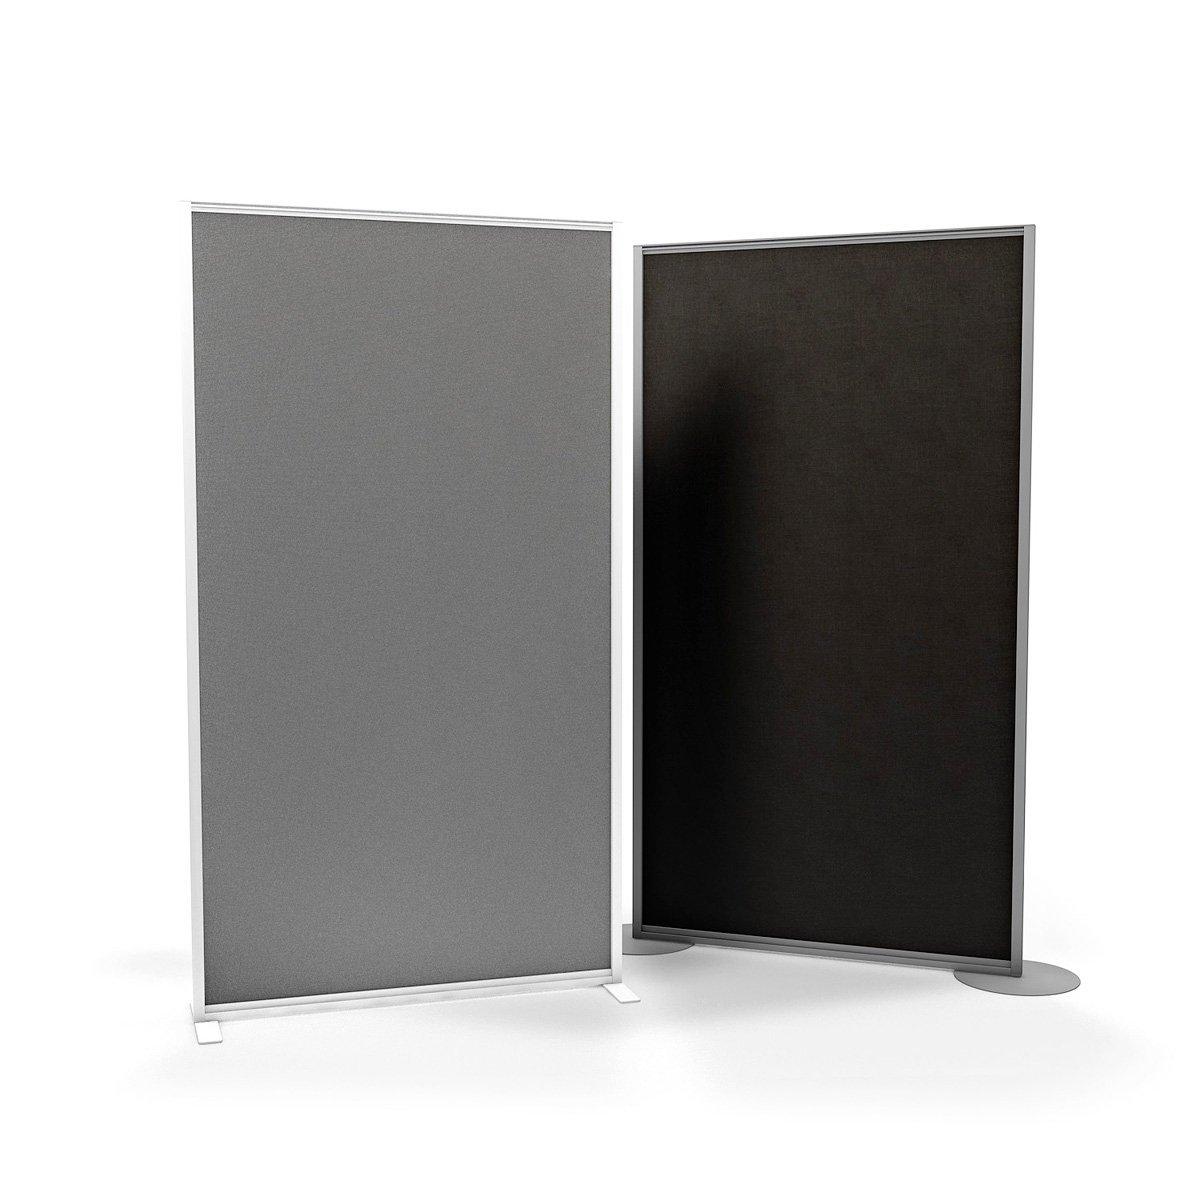 FRONTIER Acoustic Panel Screens Freestanding Partitions